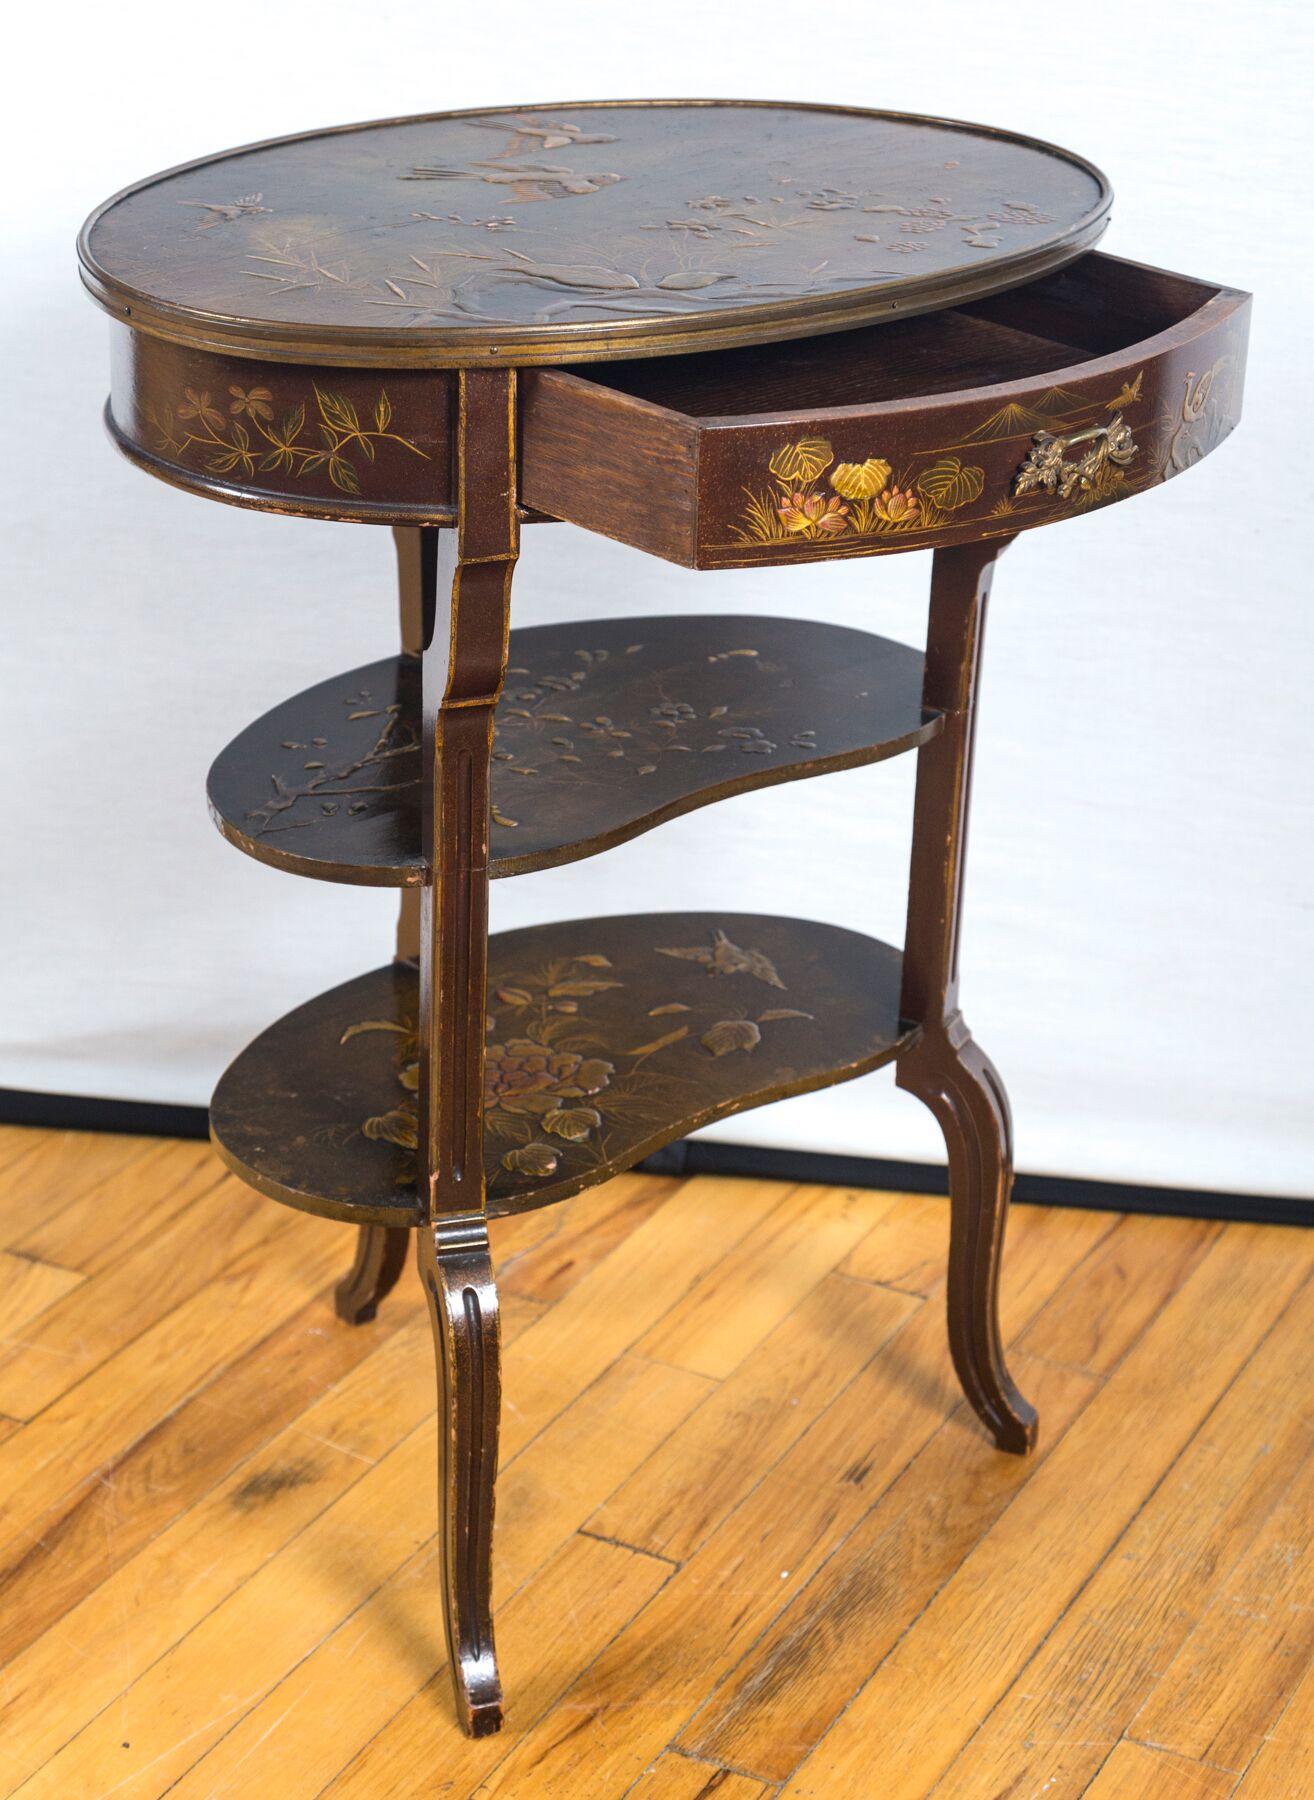 A Louis XV style occasional table hand painted with birds, insects, foliage, and flowers. An oval top over incurvate legs joined by 2 shelves as stretchers. A single drawer, with original decorative hardware.